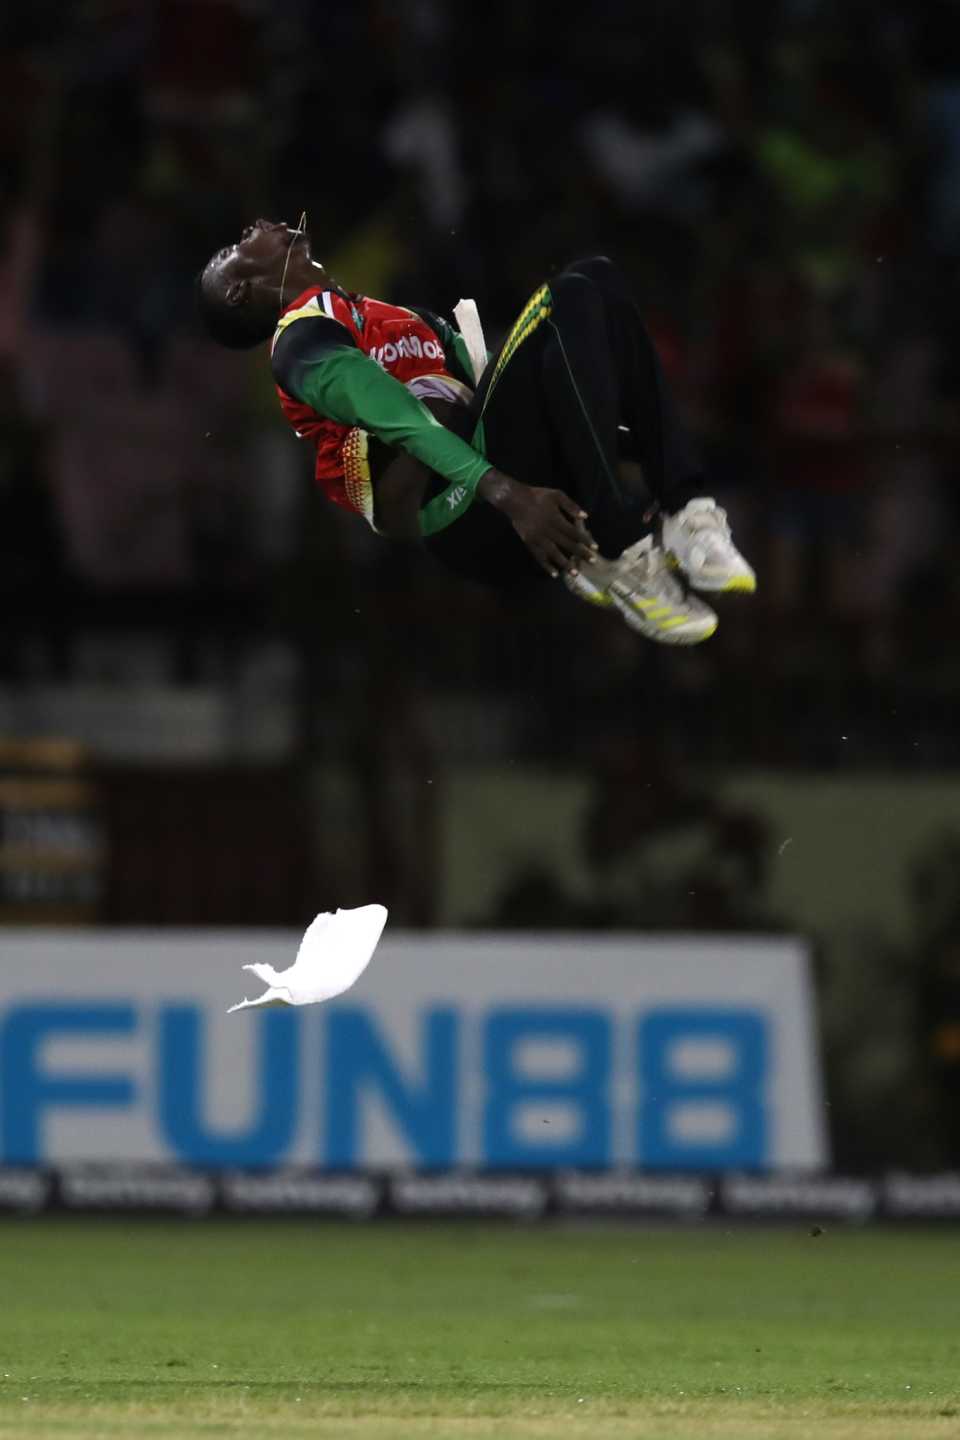 Up in the air: Junior Sinclair pulls off an acrobatic celebration, Guyana Amazon Warriors vs Trinbago Knight Riders, CPL 2022, Providence, September 24, 2022